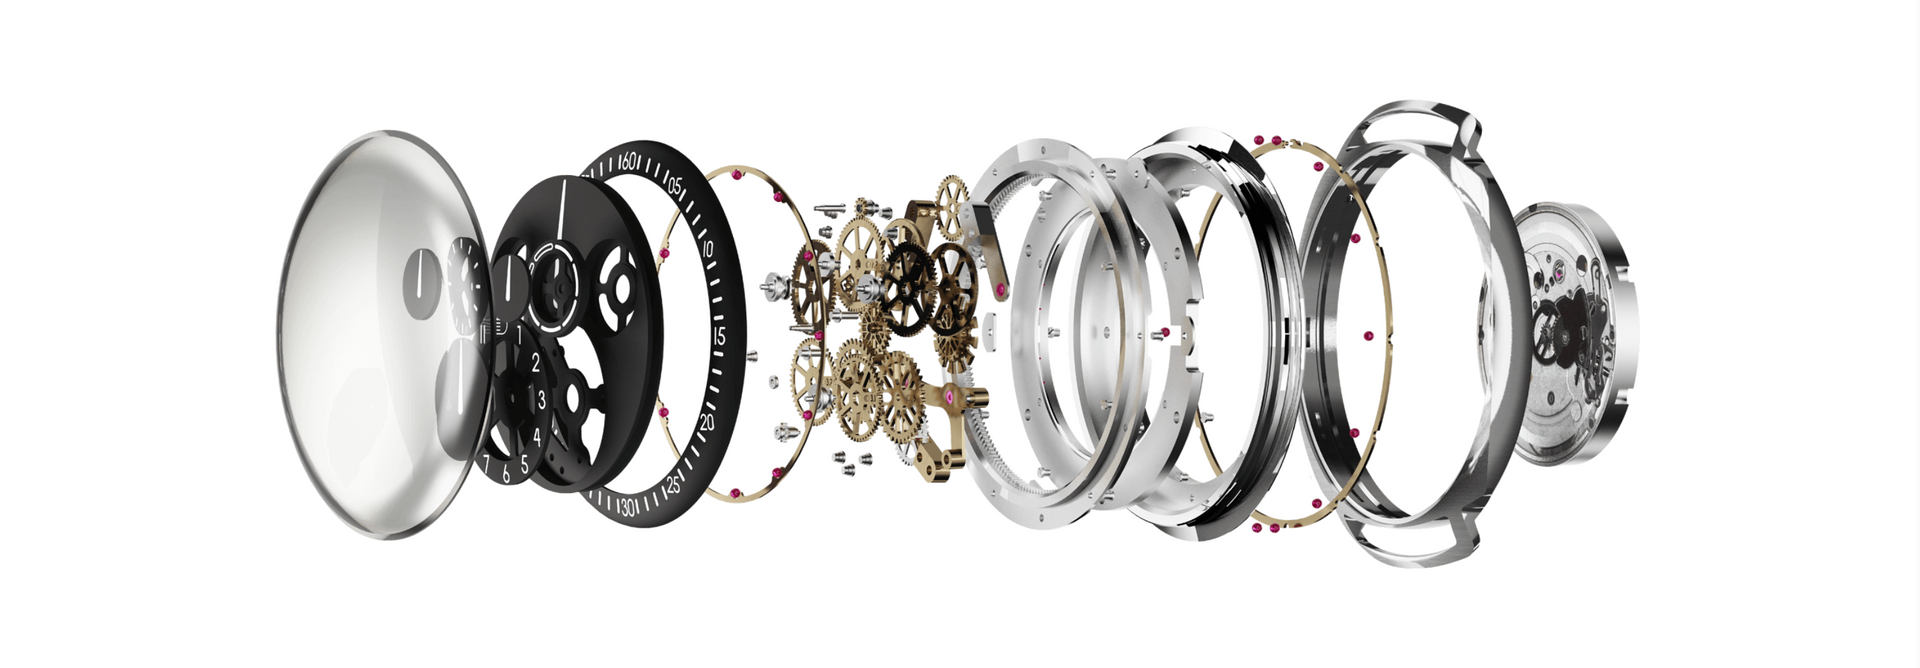 Exploded view of a Ressence watch. These are mechanical sculptures driven by "normal" base movements. 